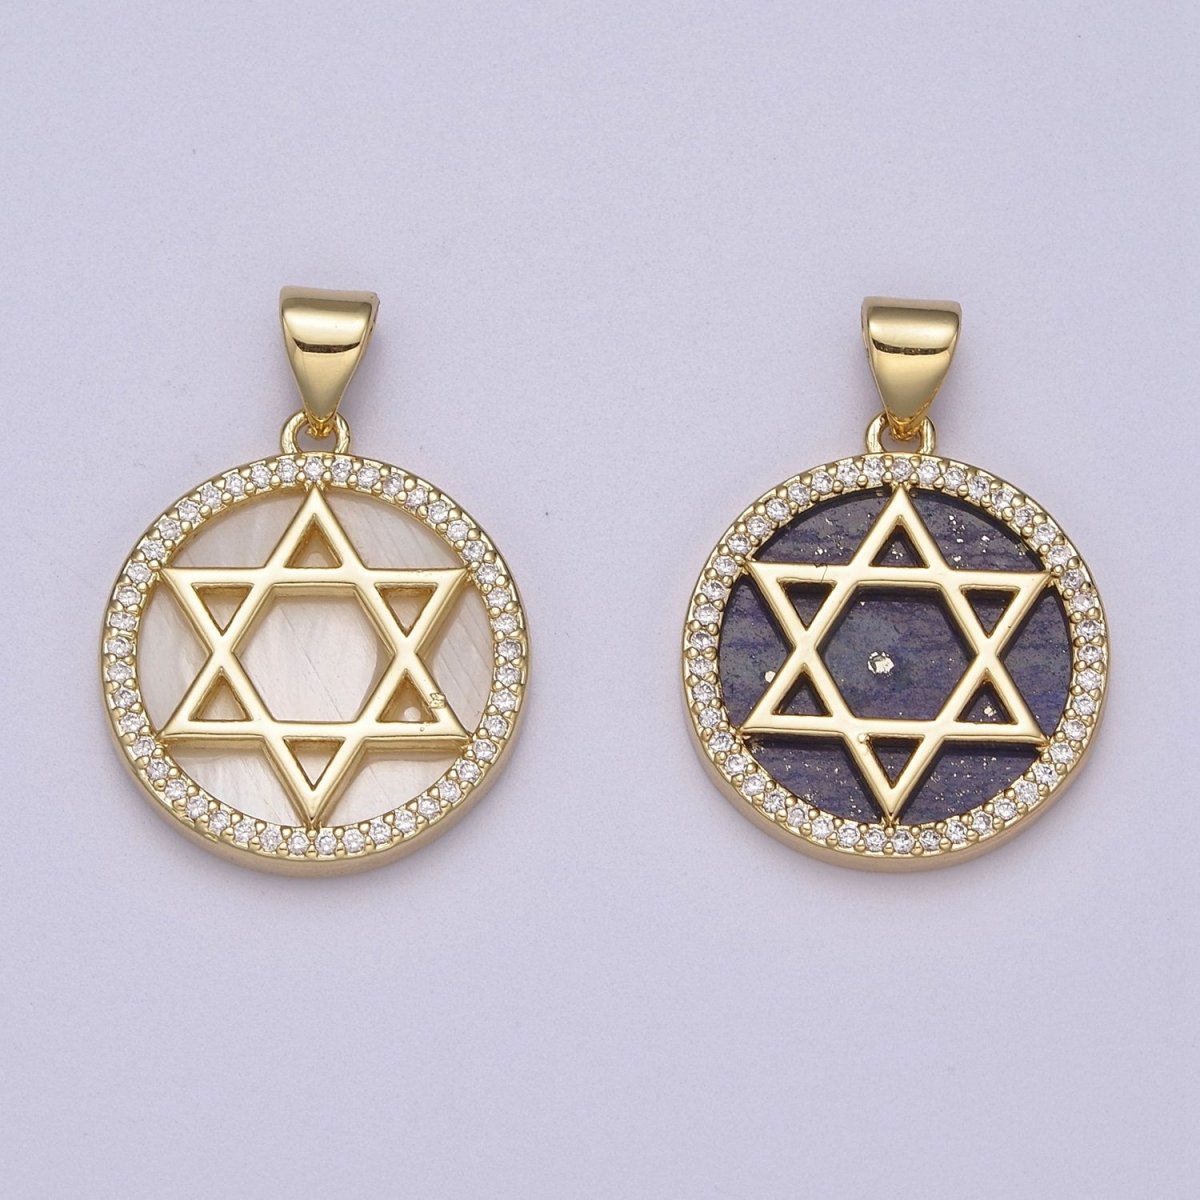 Gold Star David Pearl Medallion Pendant Round Disc Religious Jewish Jewelry for Necklace Earring Charm J-413 J-414 - DLUXCA